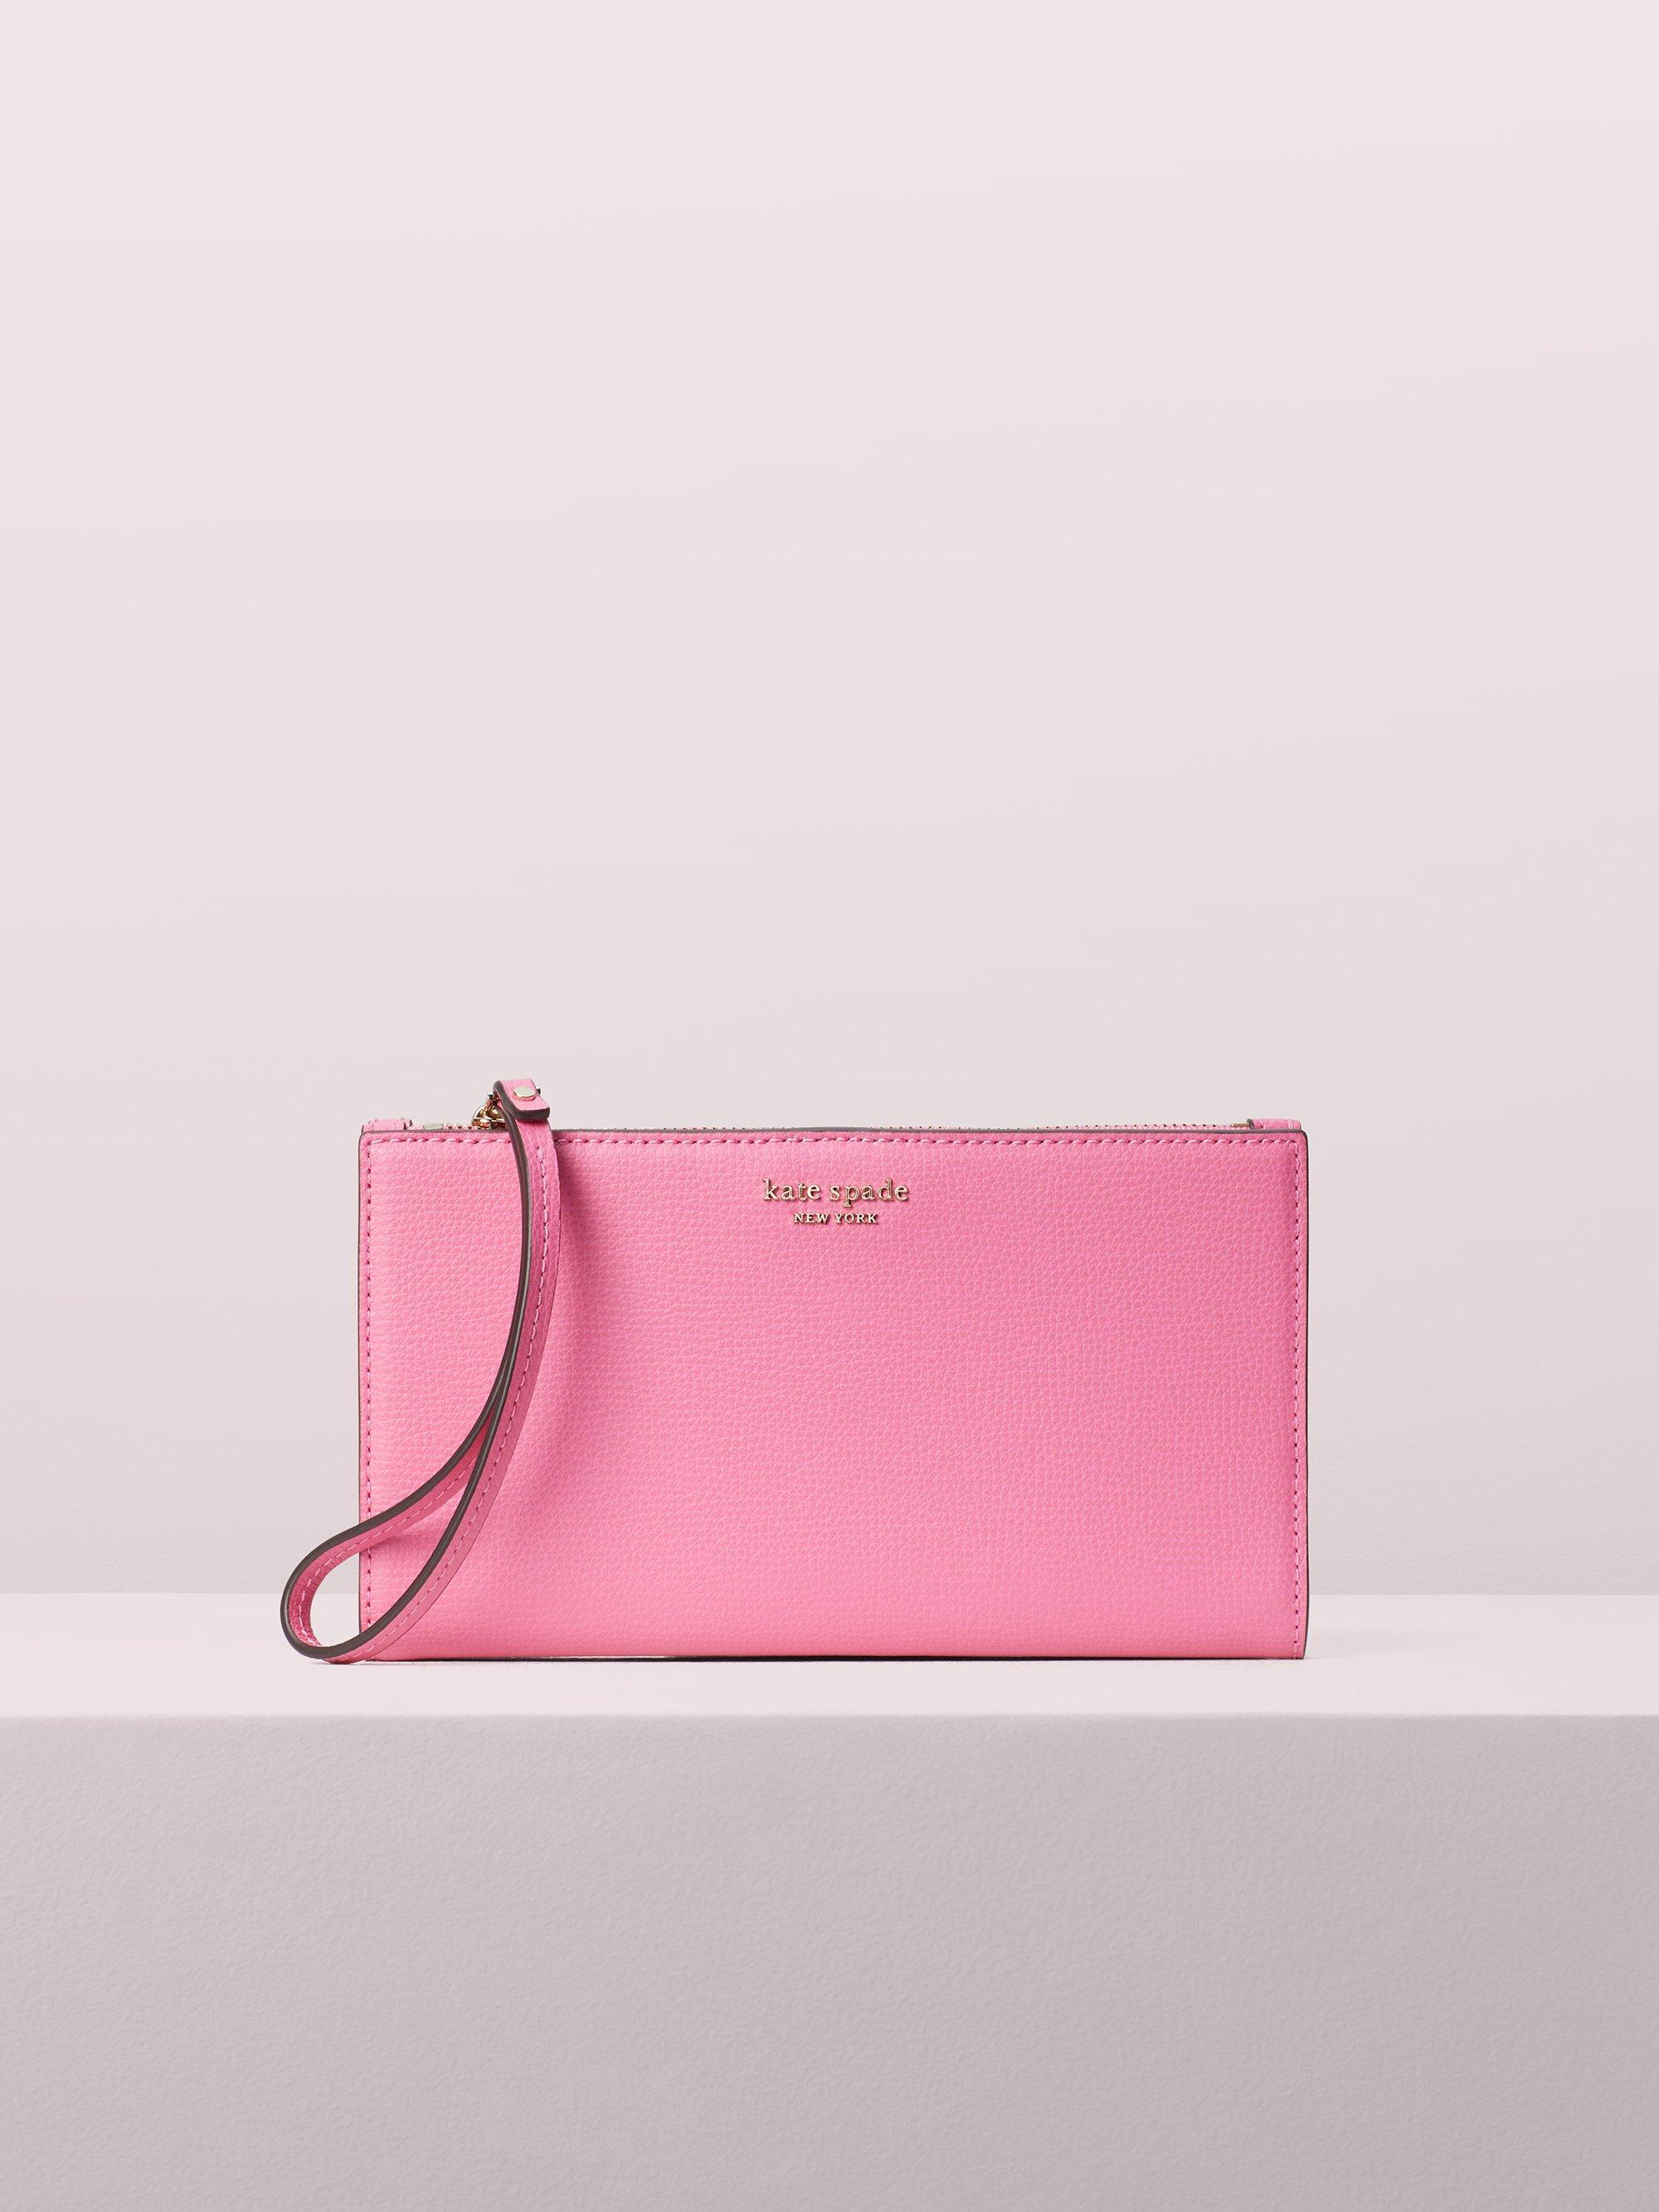 Kate Spade Sylvia Large Continental Wristlet in Pink - Lyst